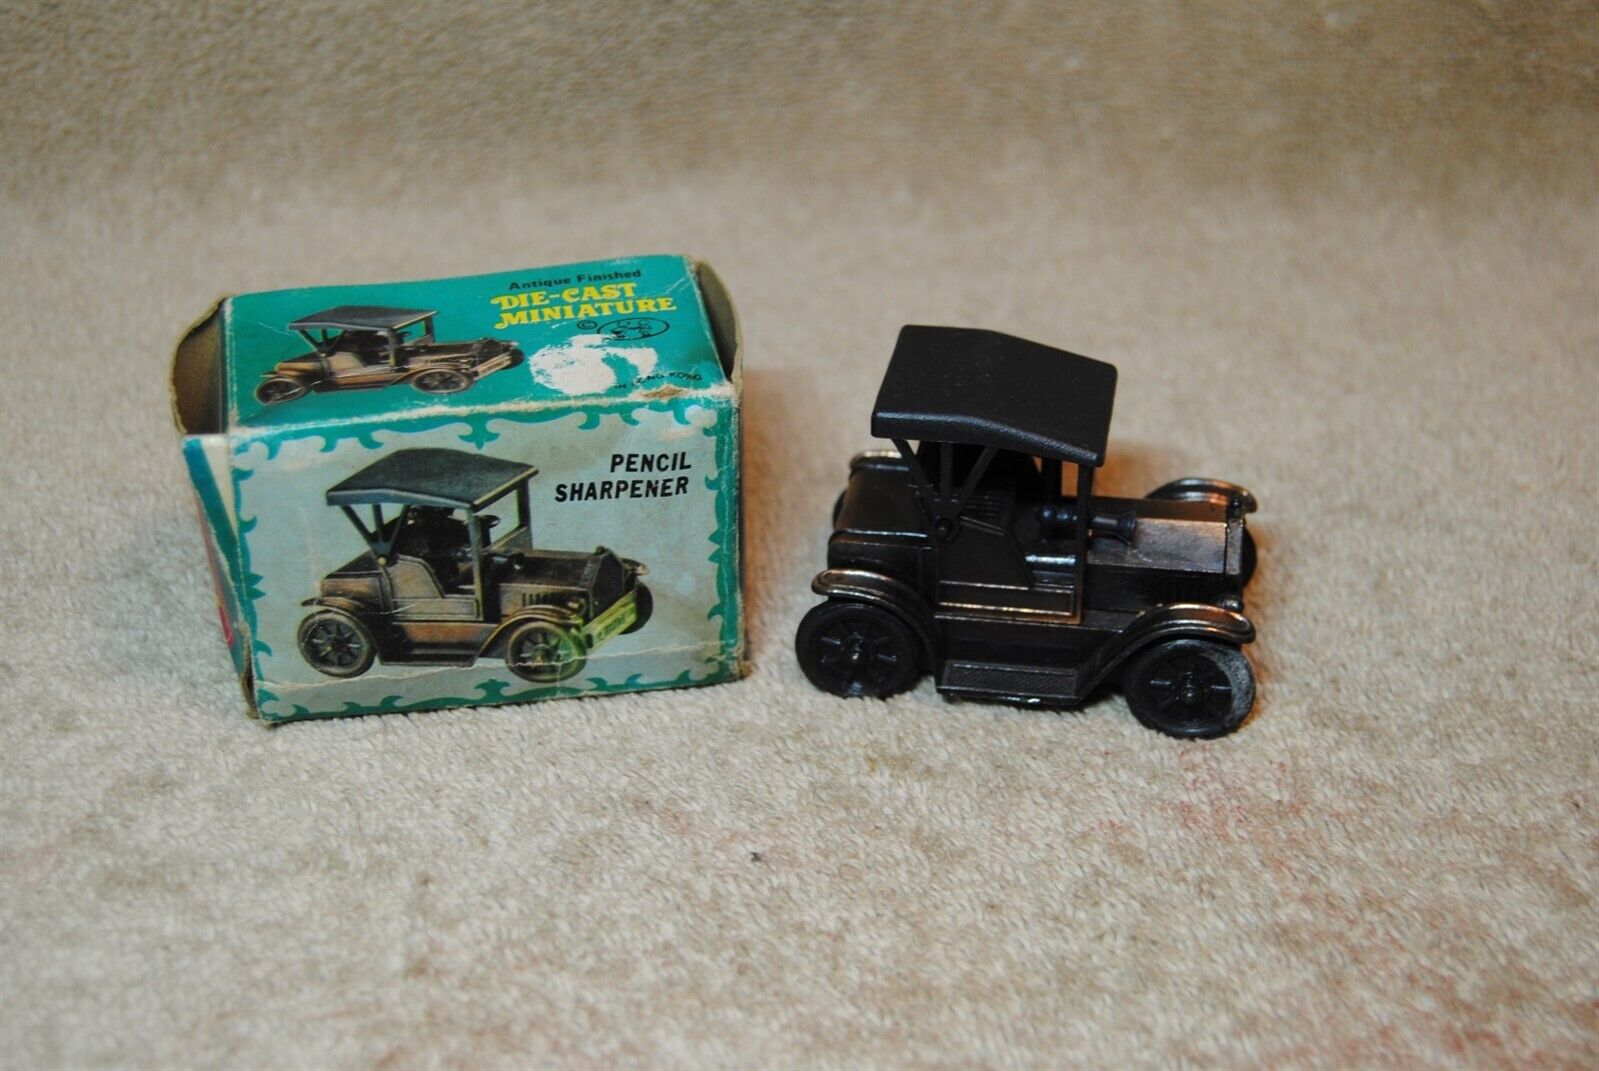 Old Antique Finished Die-Cast Car Miniature Pencil Sharpener in Box Hong Kong